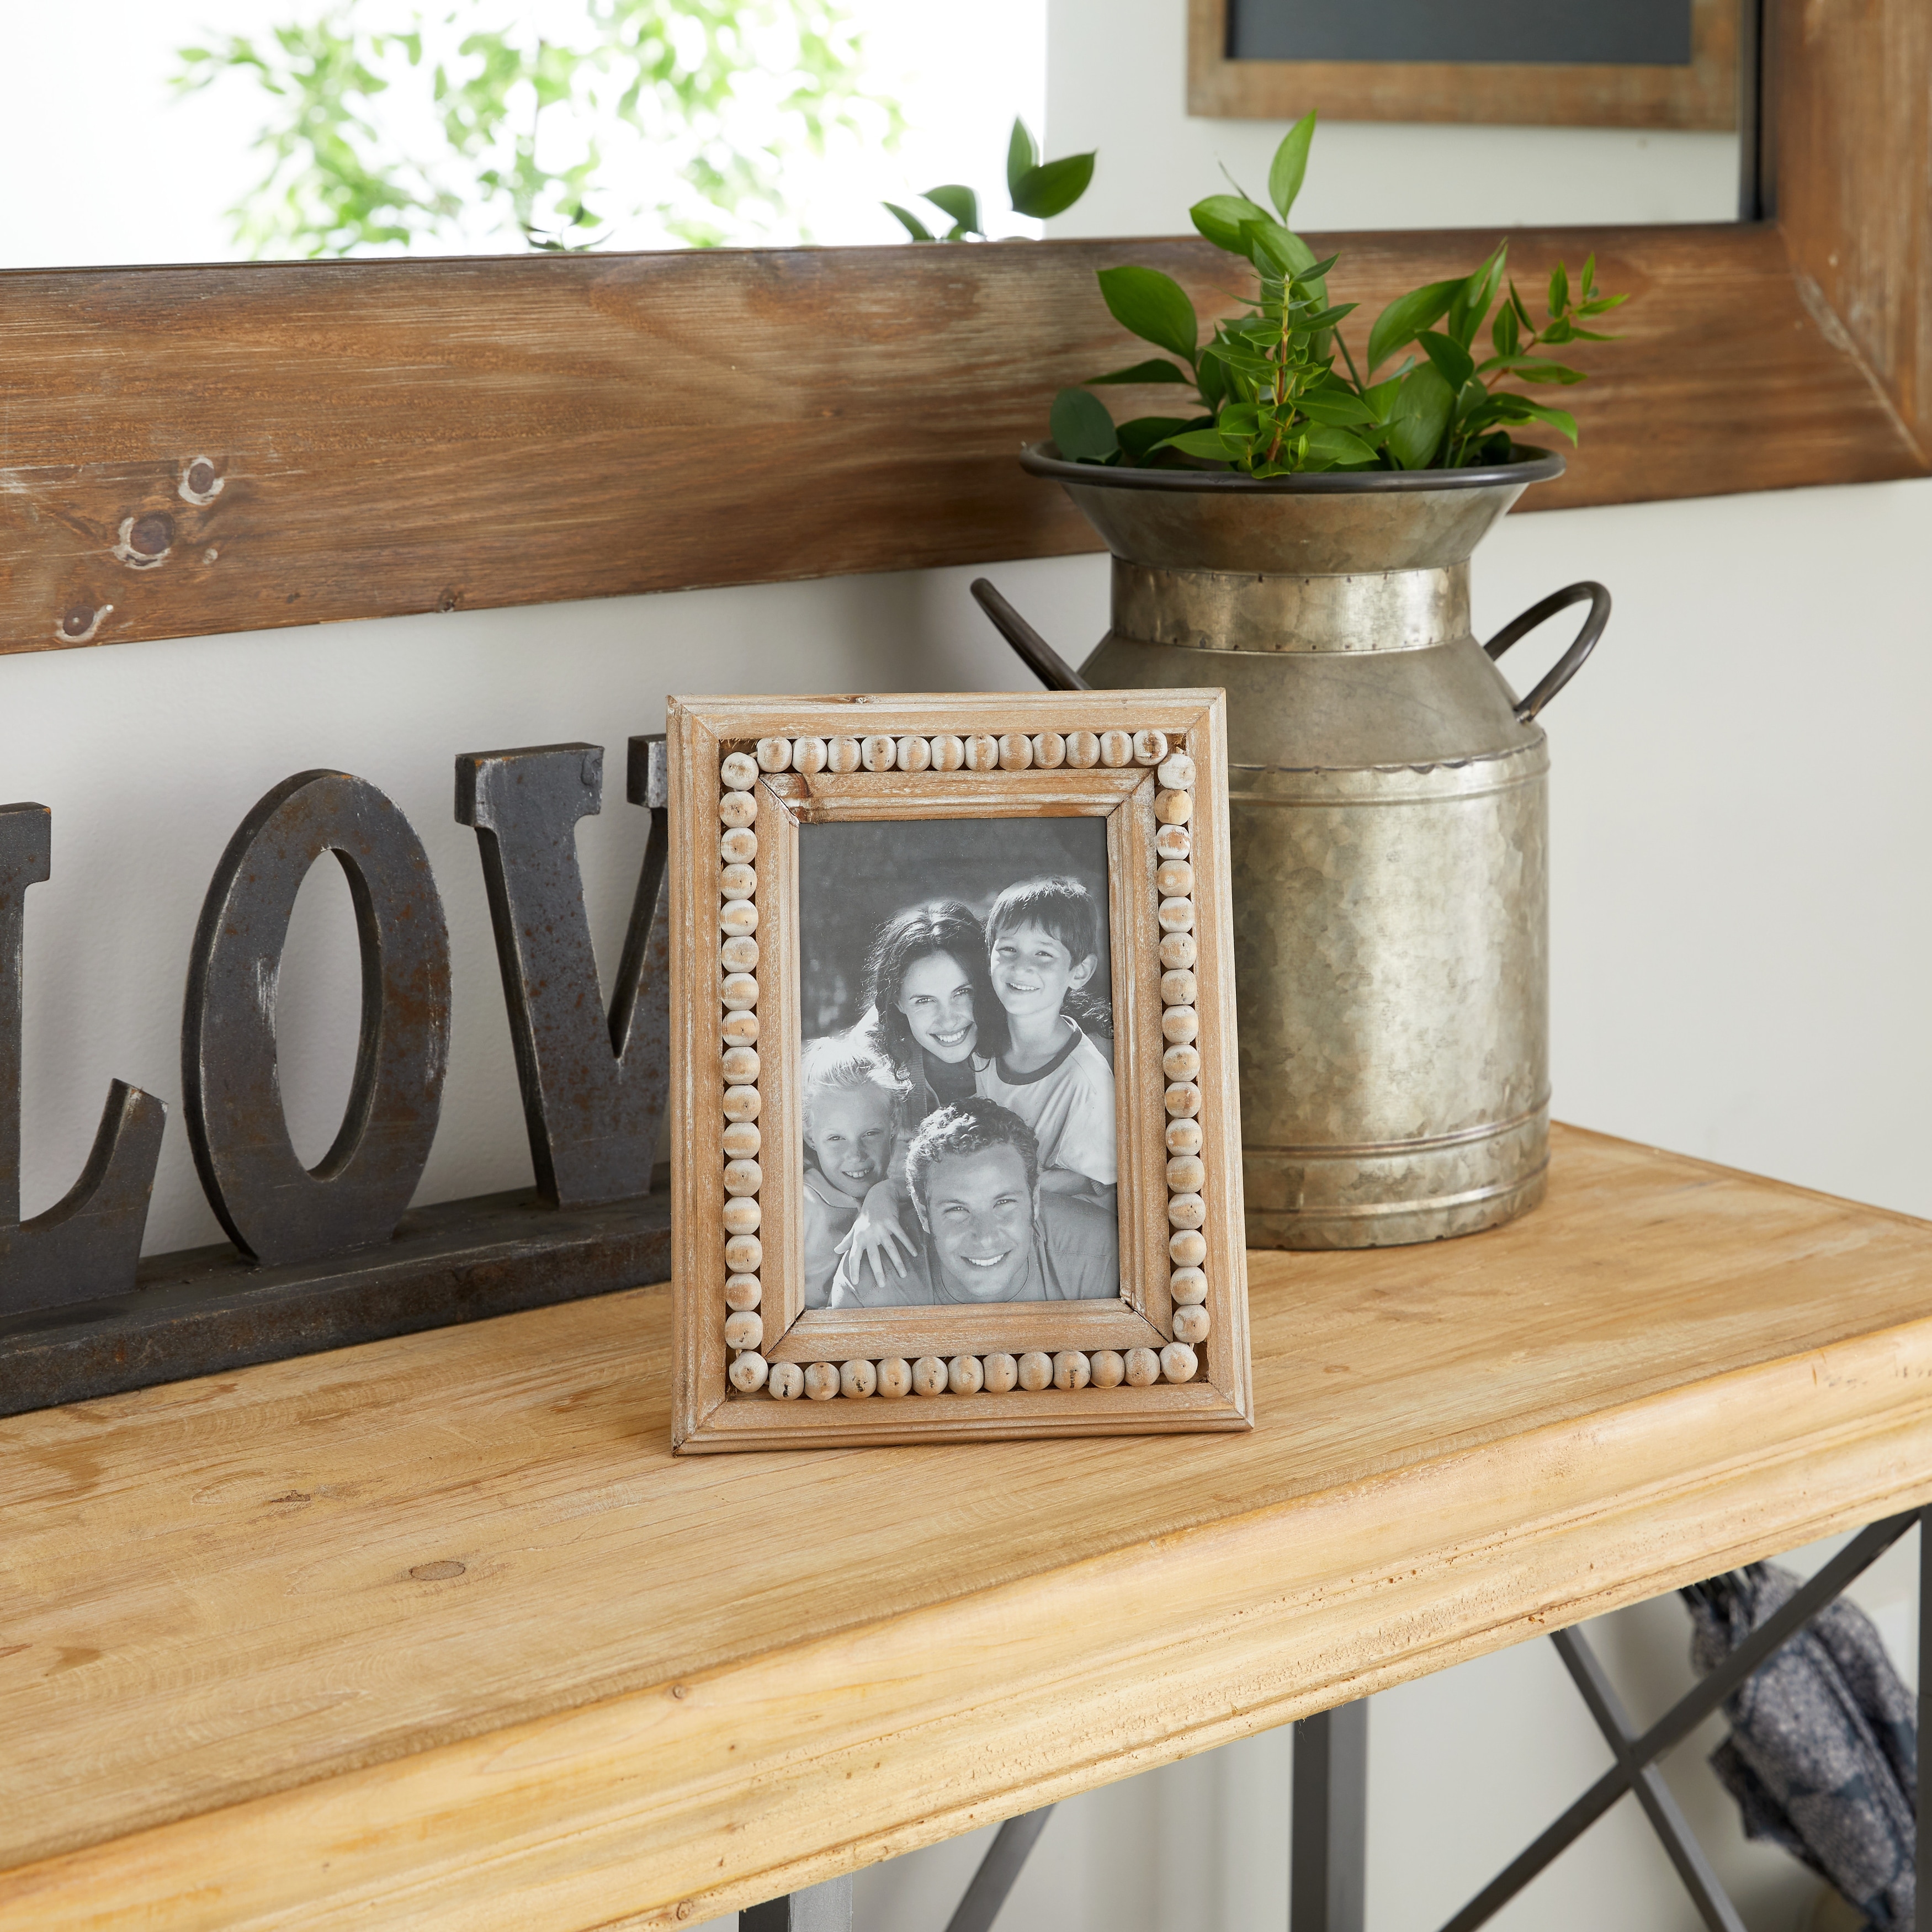 https://ak1.ostkcdn.com/images/products/is/images/direct/1217940f757c8c868795155708533bea4fb3f279/Light-Brown-Wood-Farmhouse-Photo-Frame-Family-%285x7%29.jpg